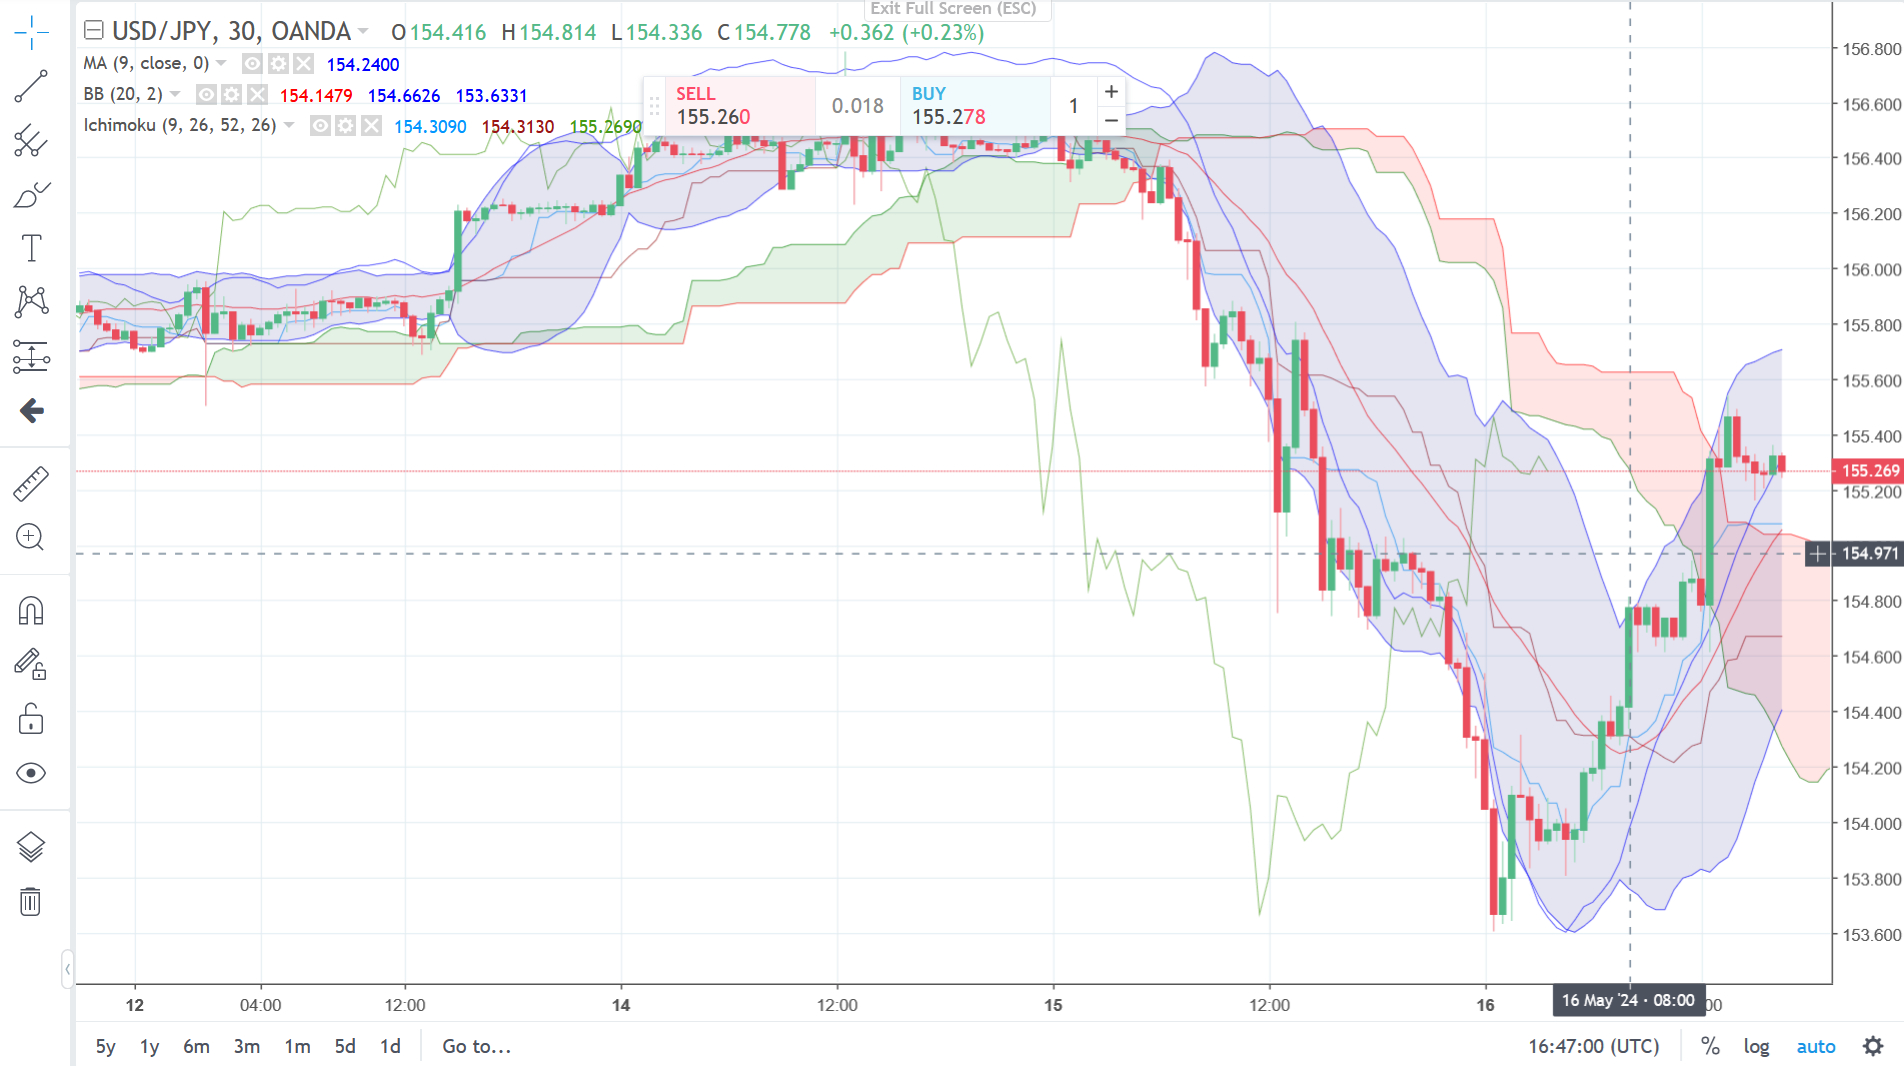 Technical analysis of the USD/JPY pairing using the OANDA trading platform